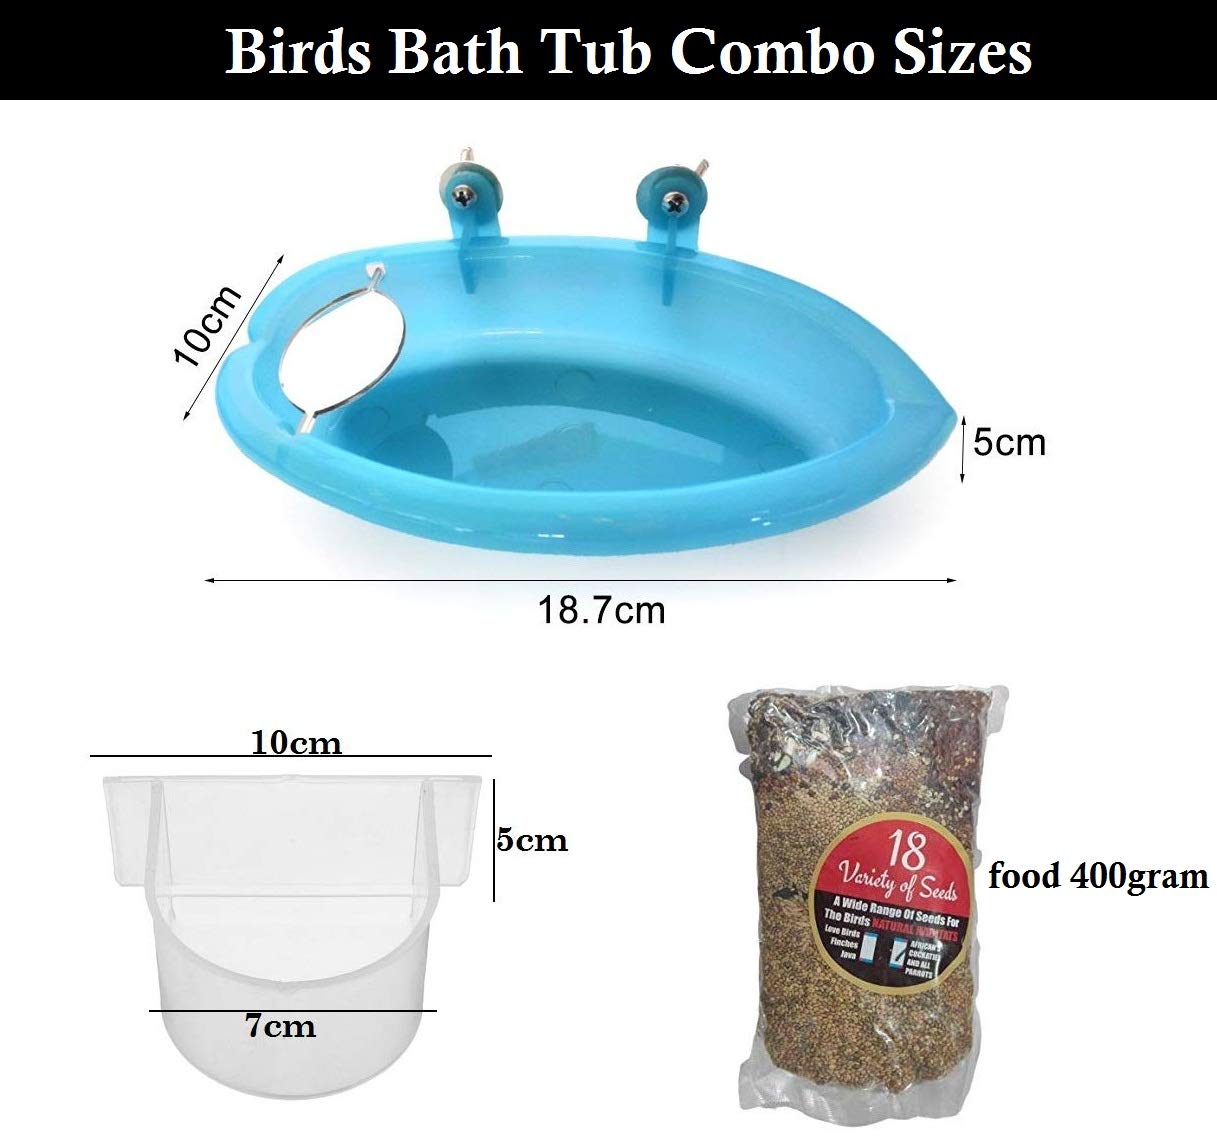 Despacito Bird Water Bath Tub Hanging Bowl with Mirror and Birds Feeder Food Mixed Seeds, Natural Seed with Feeding Bowl Combo Pack for Birds